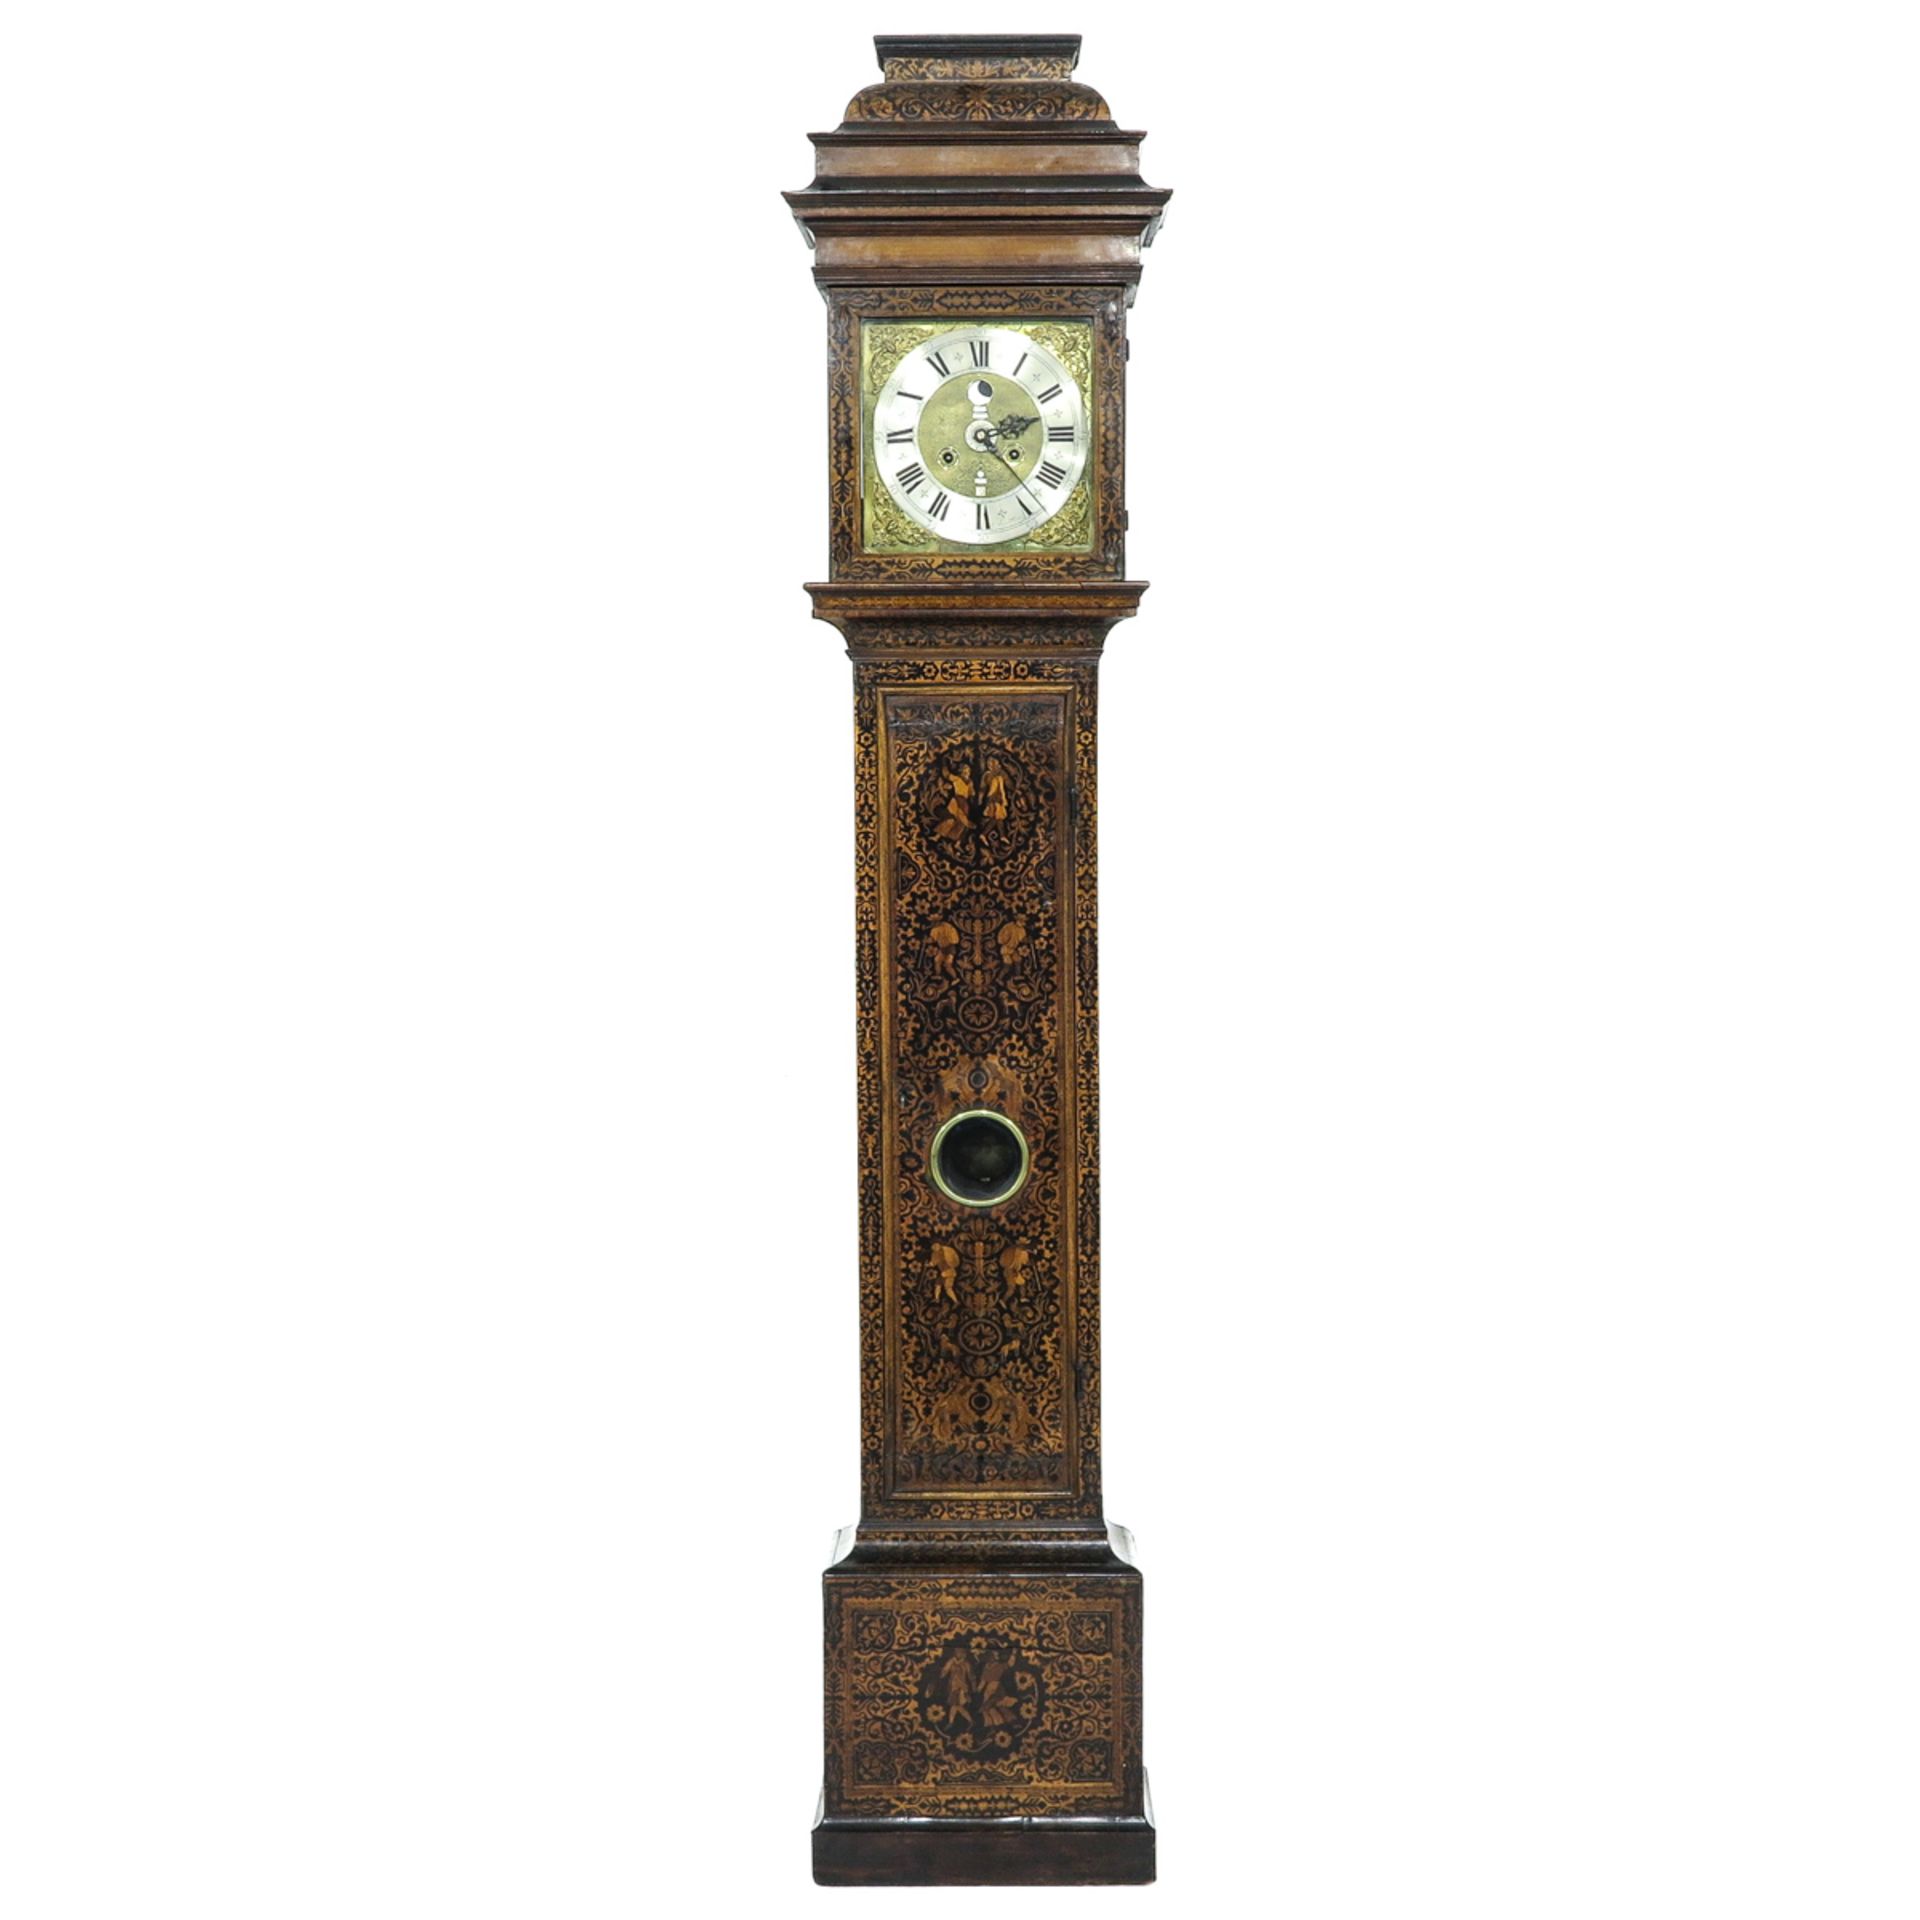 An 18th Century Amsterdam Standing Clock Signed S. Landre